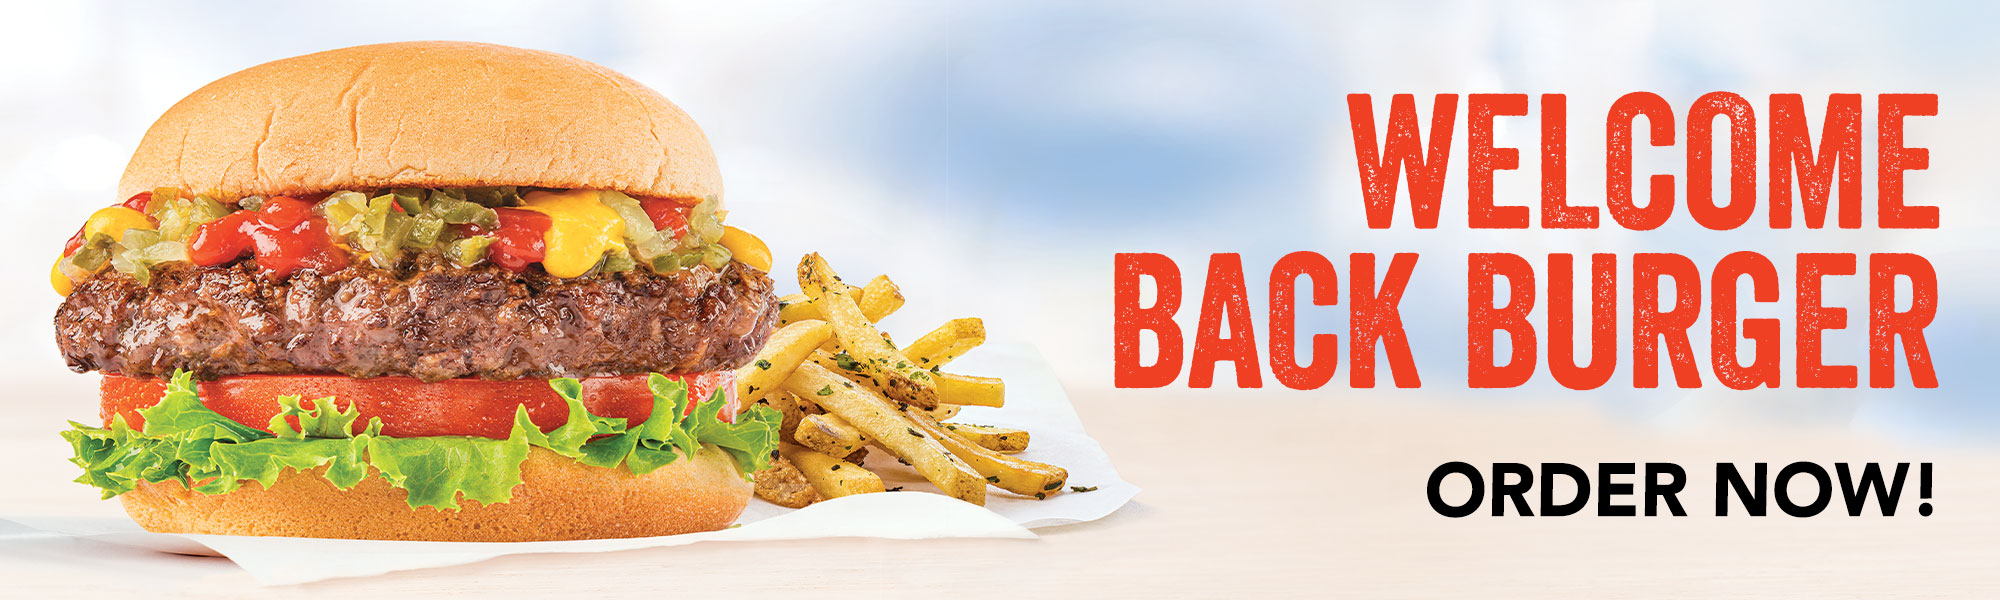 Welcome Back Burger Order Now!